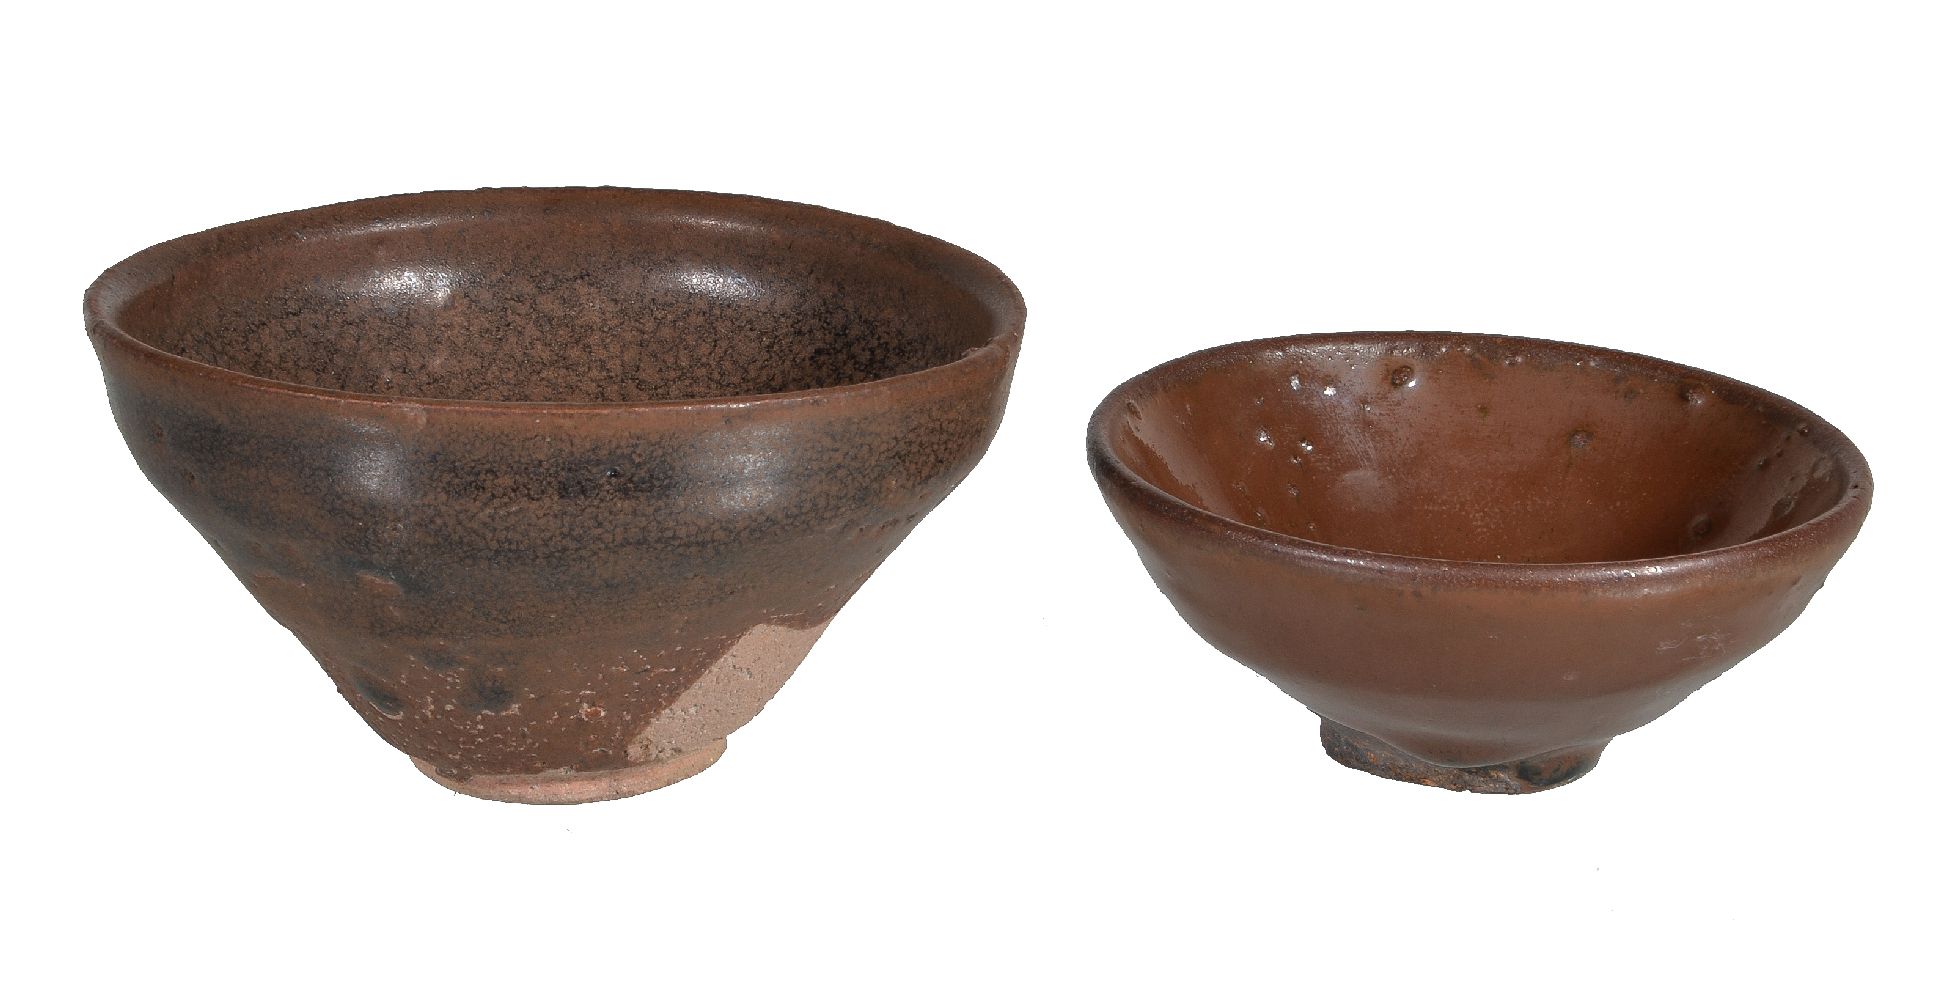 Two Chinese 'Jian' ware bowls, Song Dynasty, the larger with brown spotted glaze on a darker ground,